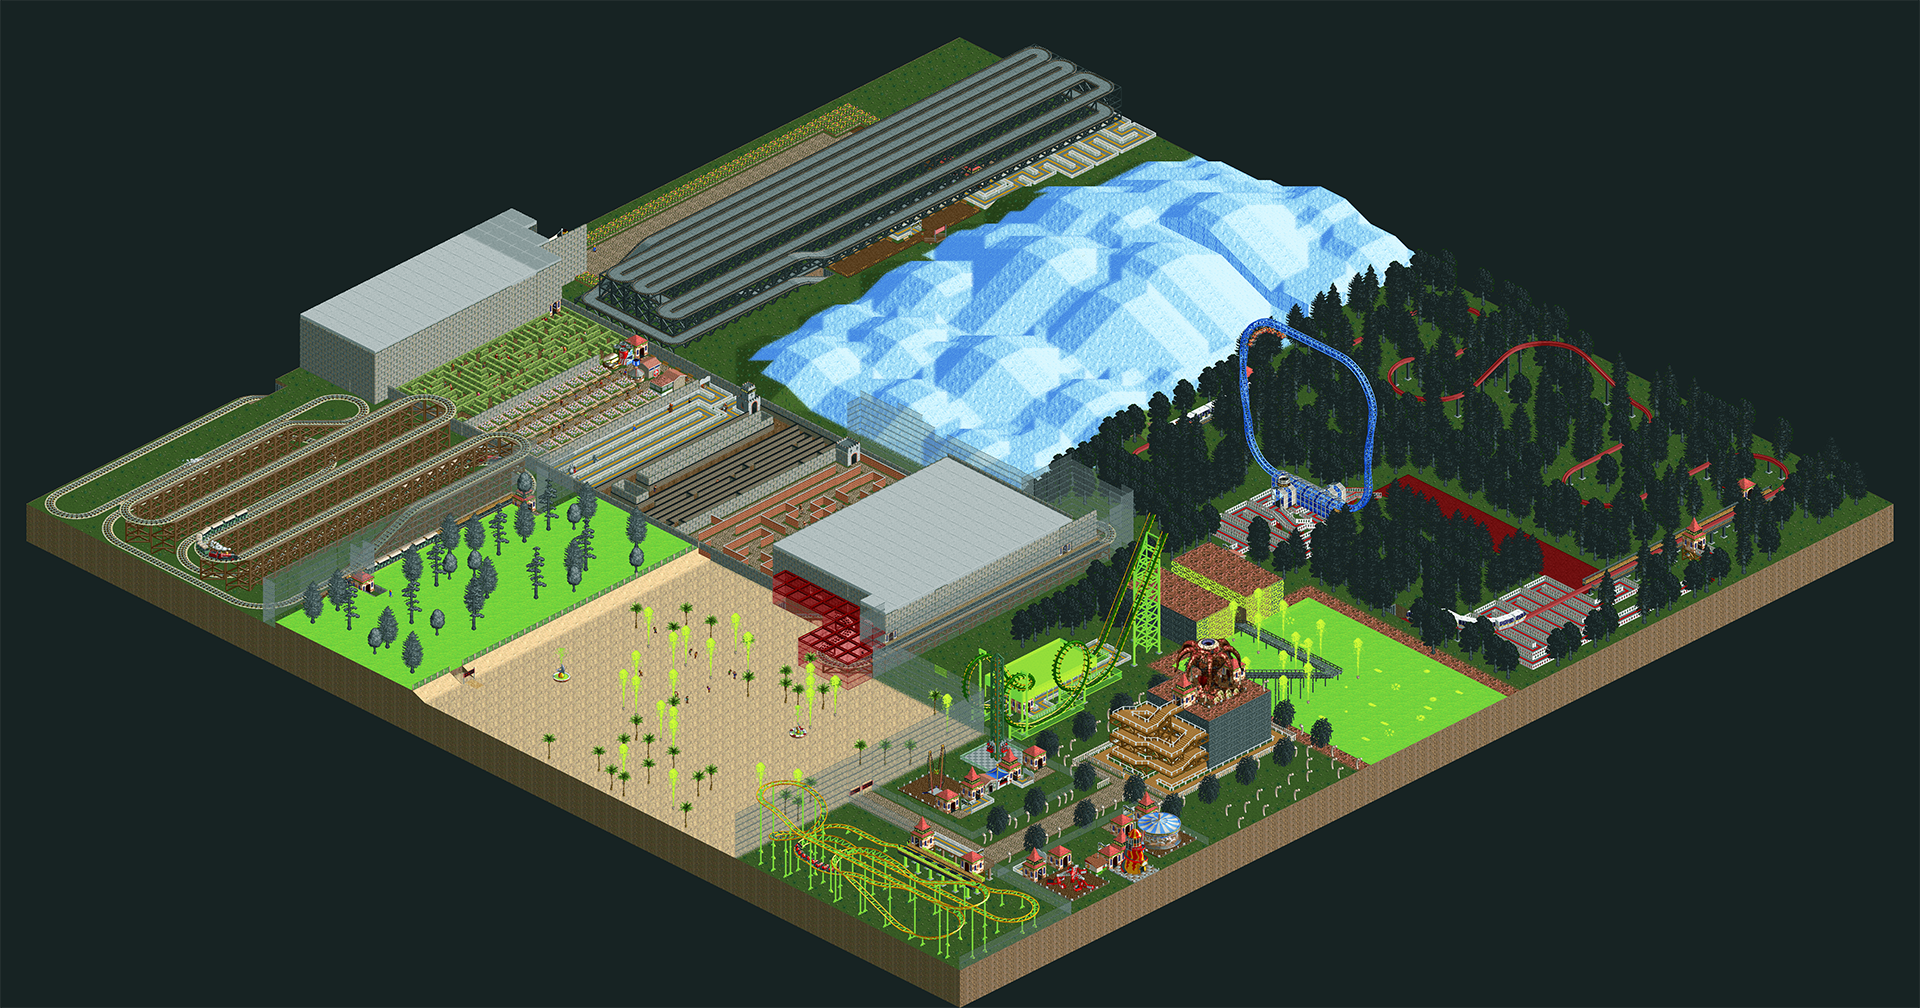 Rollercoaster Tycoon Park Puts Attendees On The Path To Enlightenment